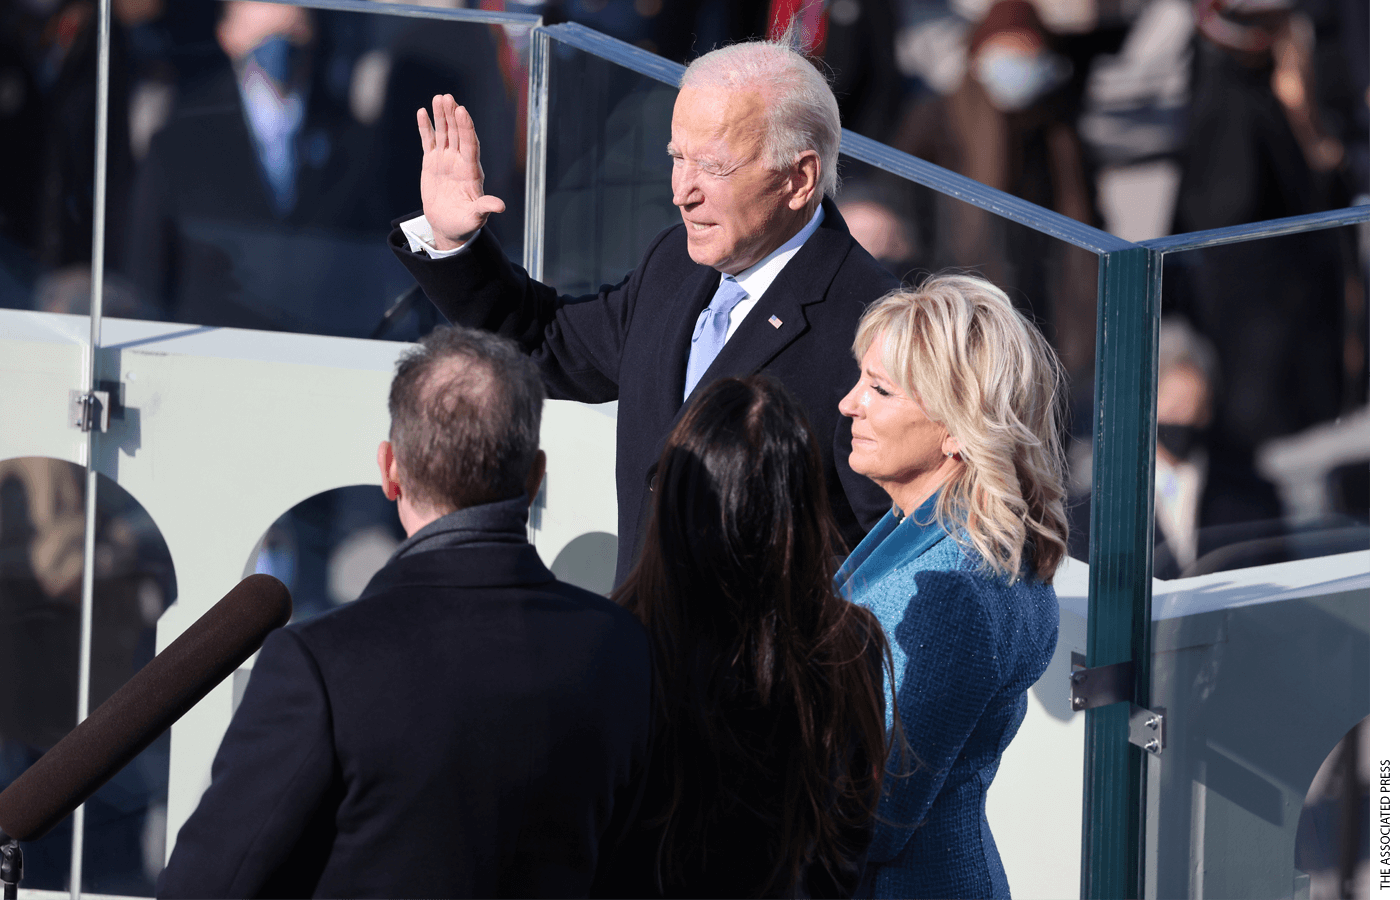 Joe Biden is sworn in as U.S. President as his wife Dr. Jill Biden looks on during his inauguration on the West Front of the U.S. Capitol on January 20, 2021 in Washington, DC.